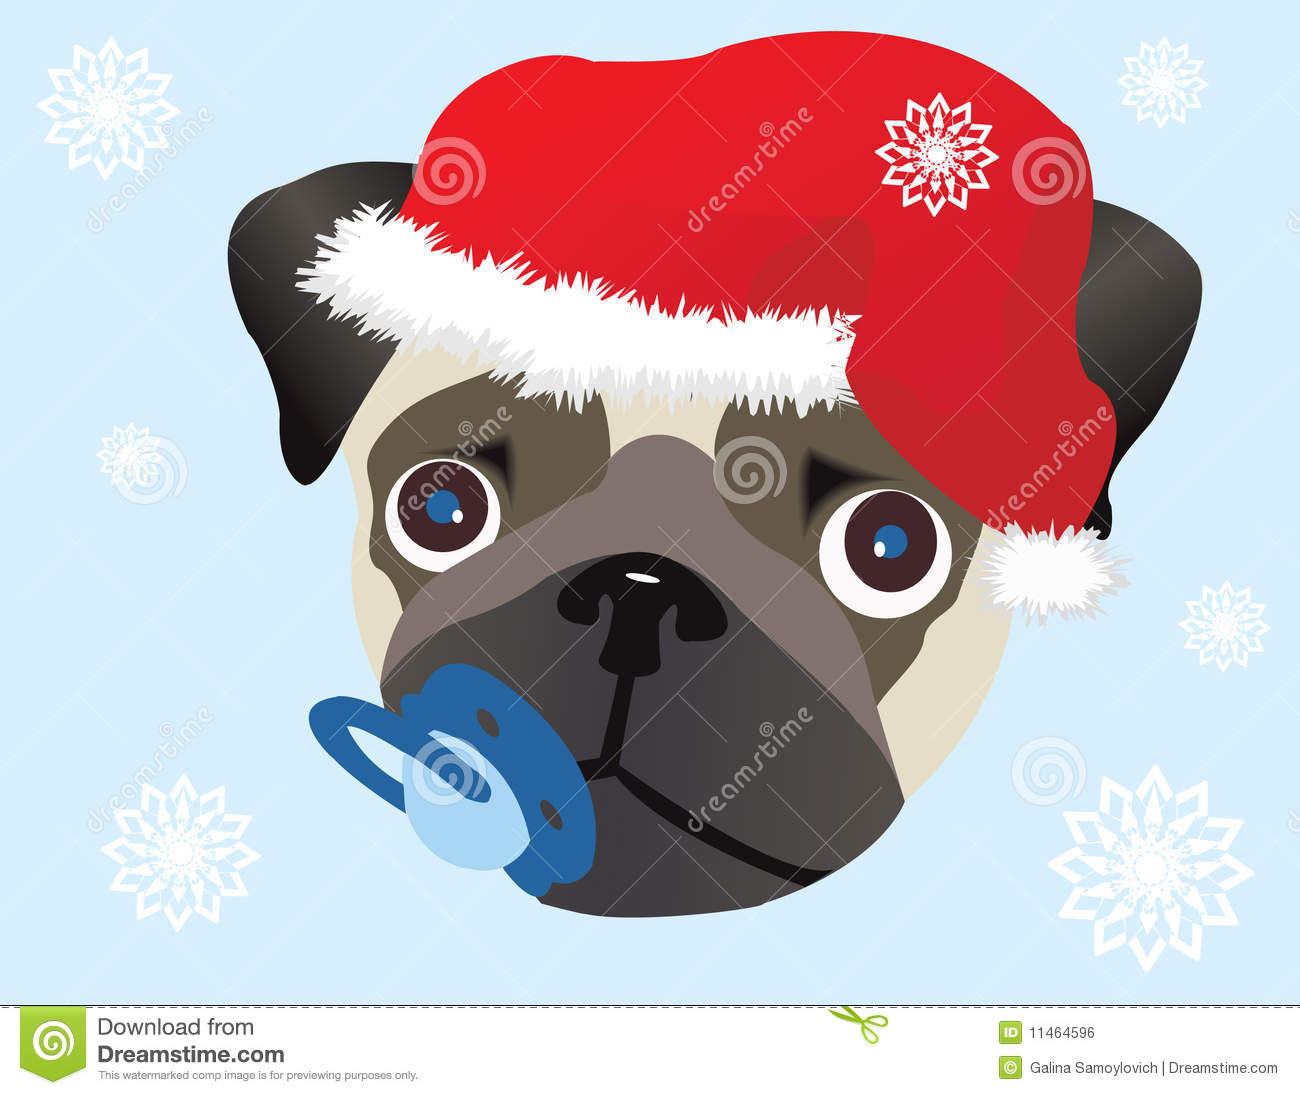 Pug In Christmas Hat Royalty Free Stock Image   Image  11464596